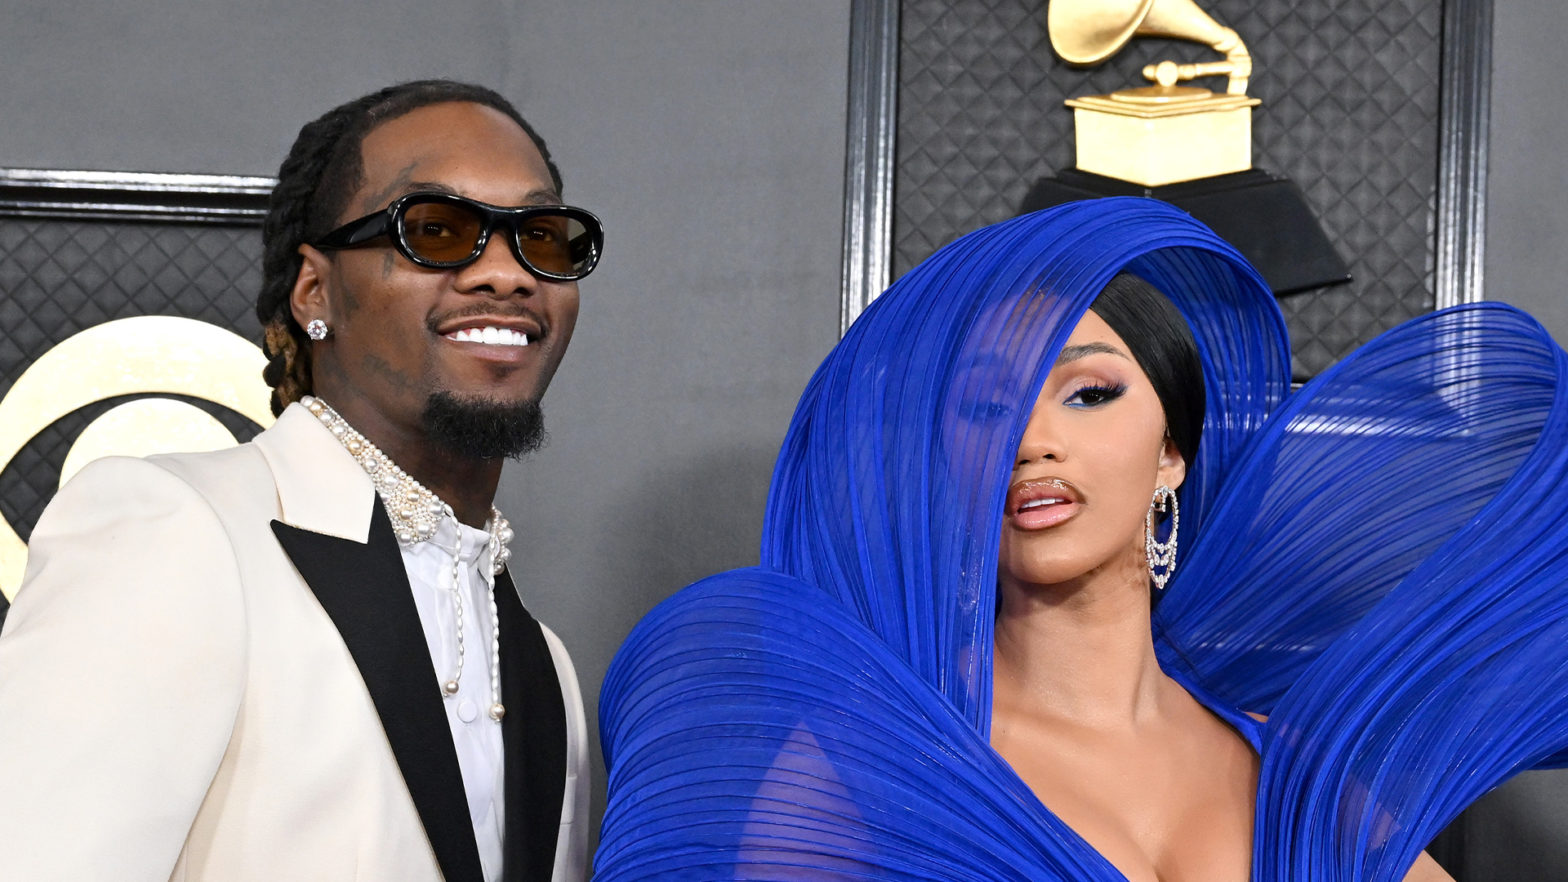 Some McDonald's Franchisees Are Reportedly 'Refusing' To Market The Cardi B and Offset Meal